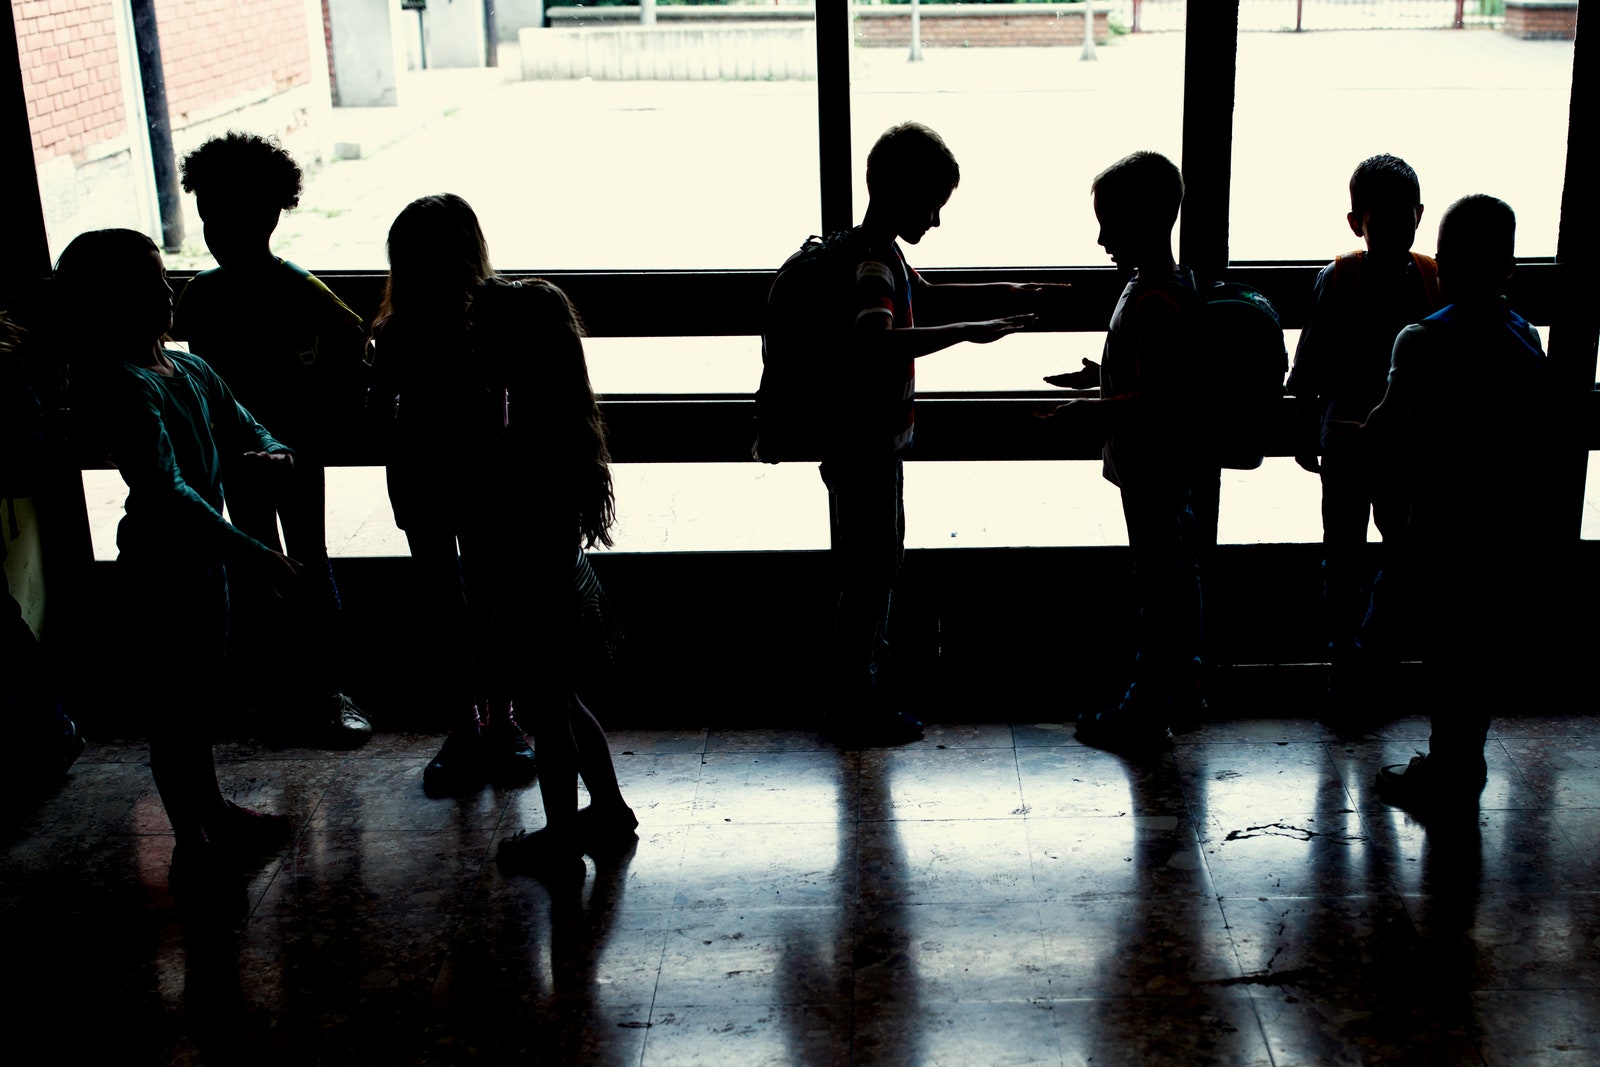 Silhouettes of a group of school children standing in a hallway playing together and communicating